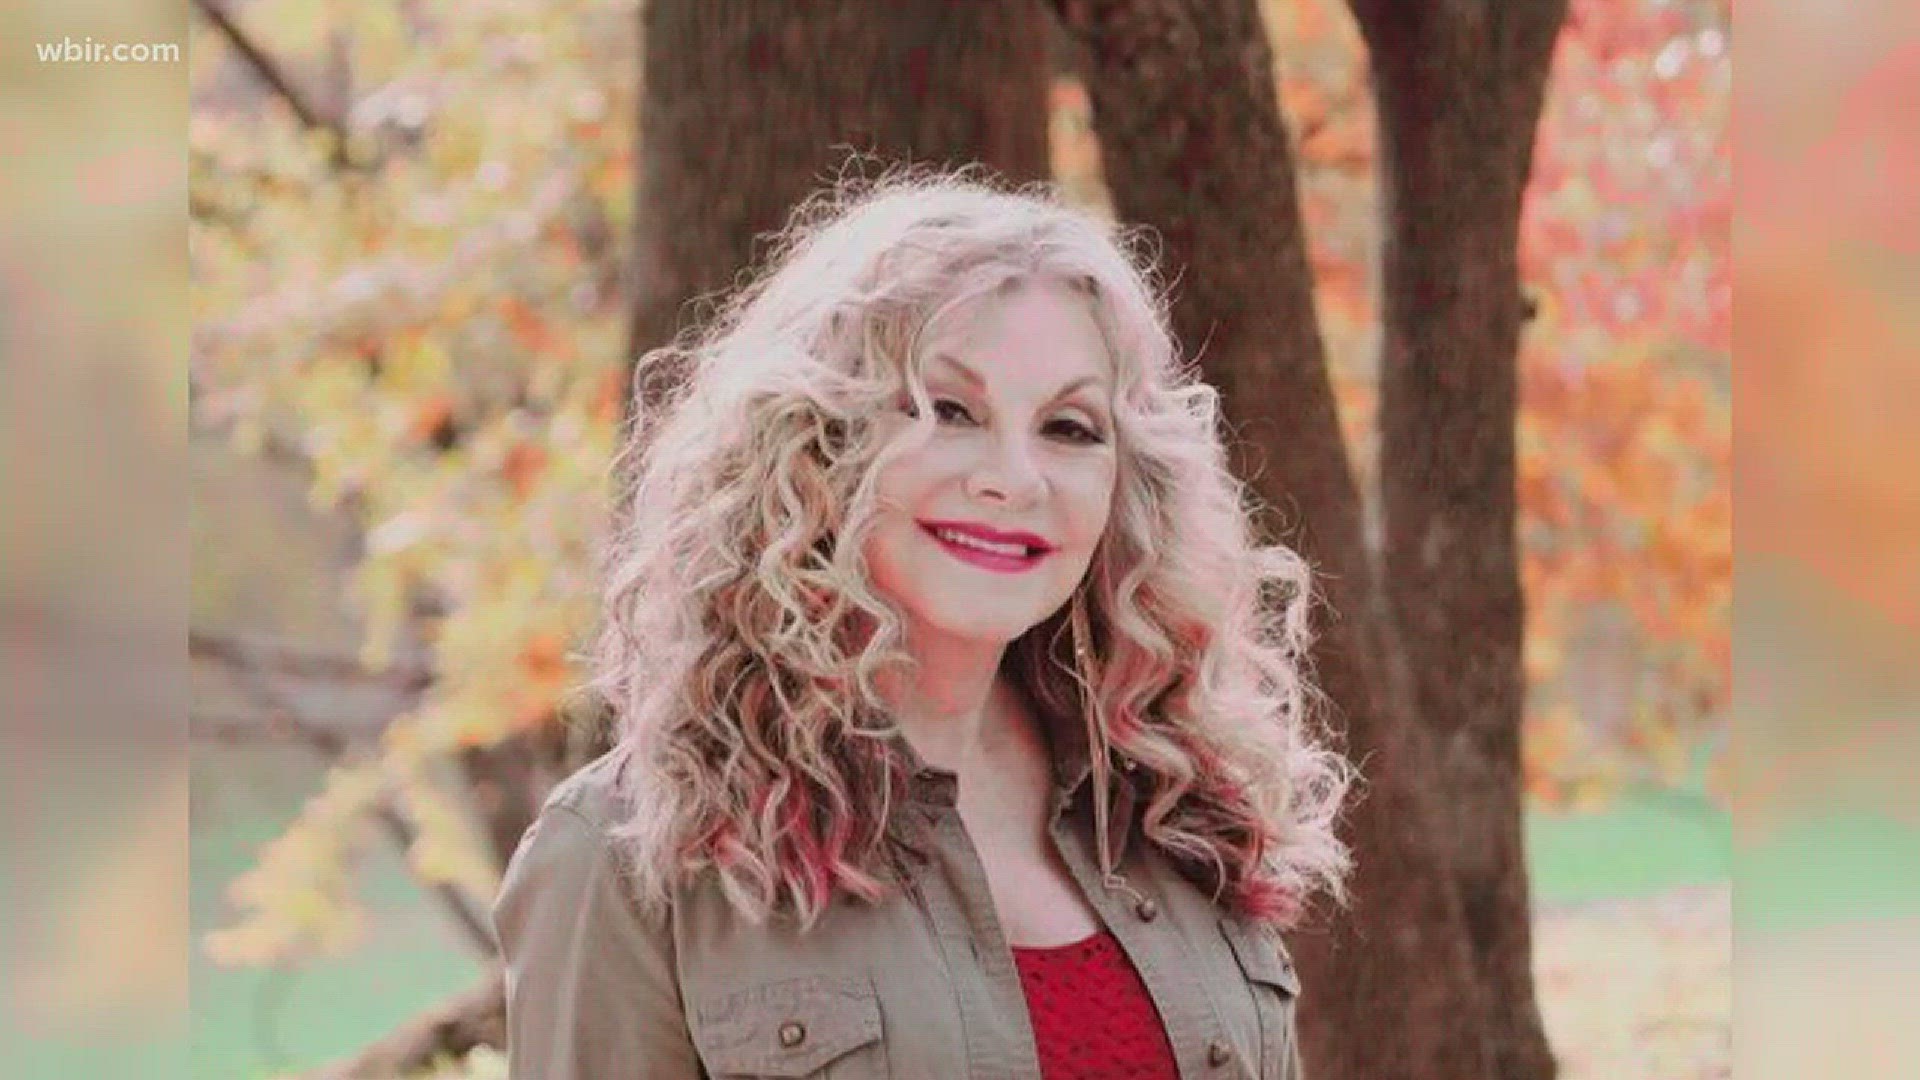 Nov. 8, 2017: Dolly Parton's sister Stella is urging country music stars to speak out against sexual harassment in the industry.